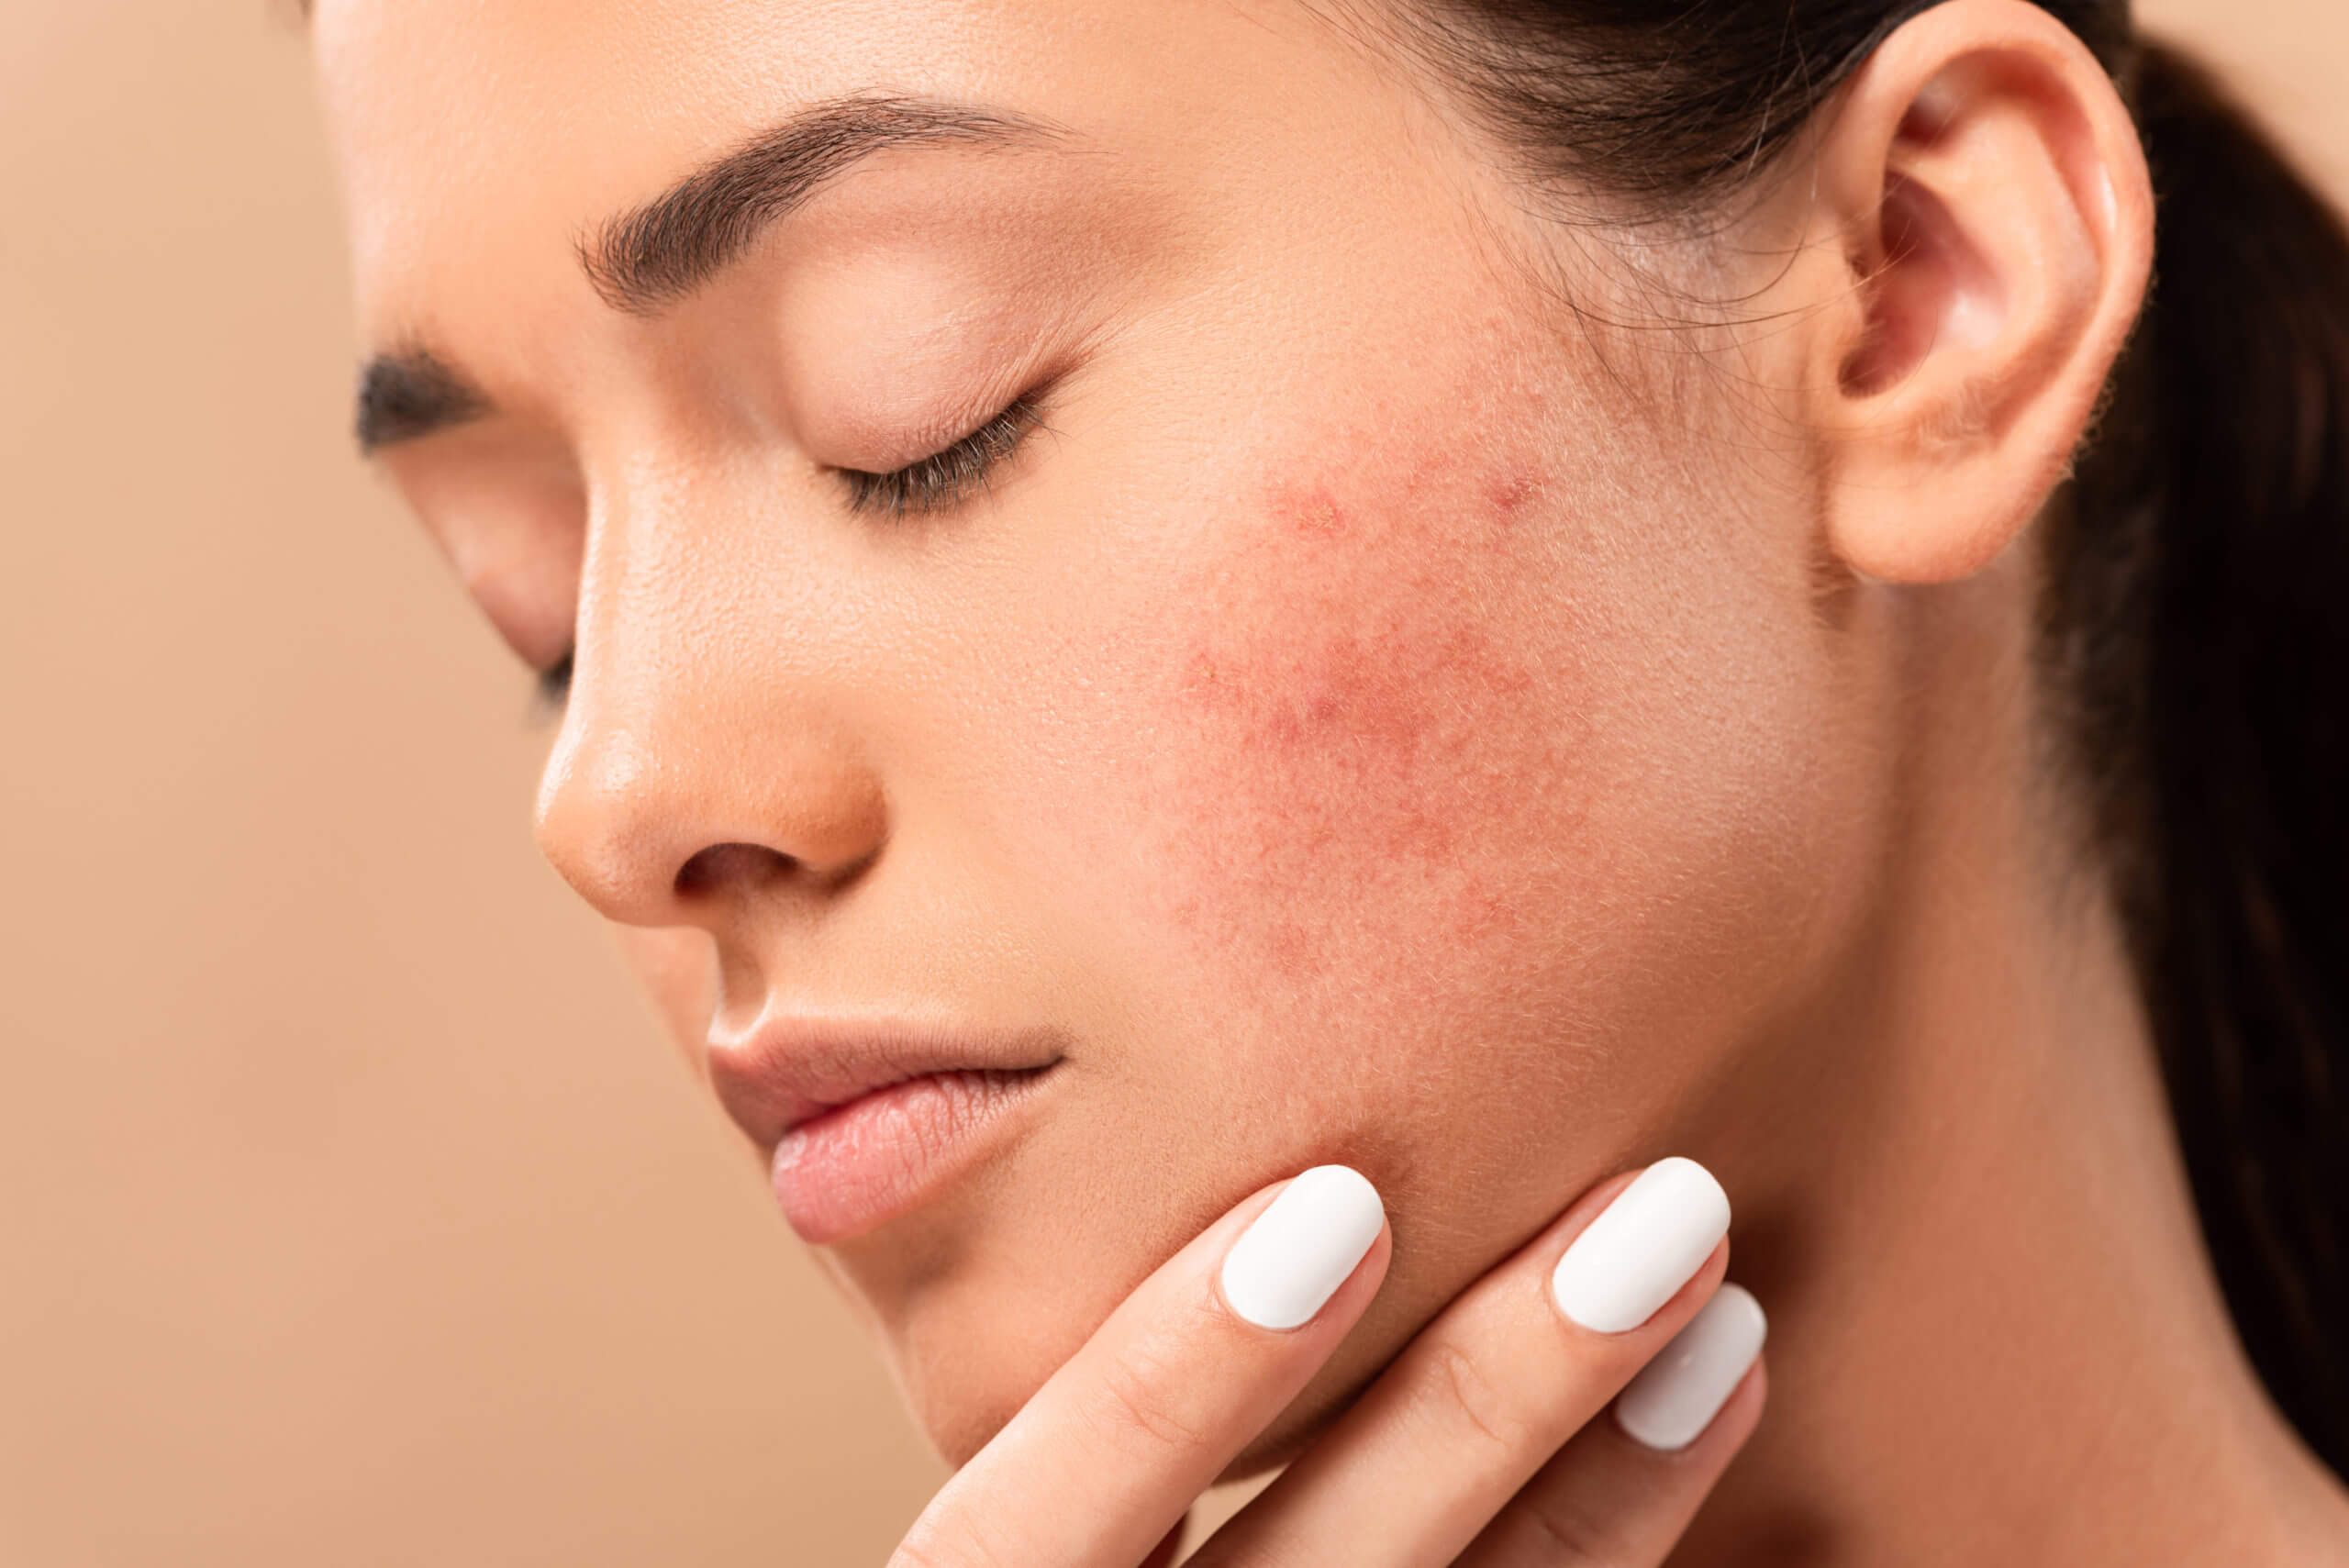 What Are The Best Treatments For Acne Scars